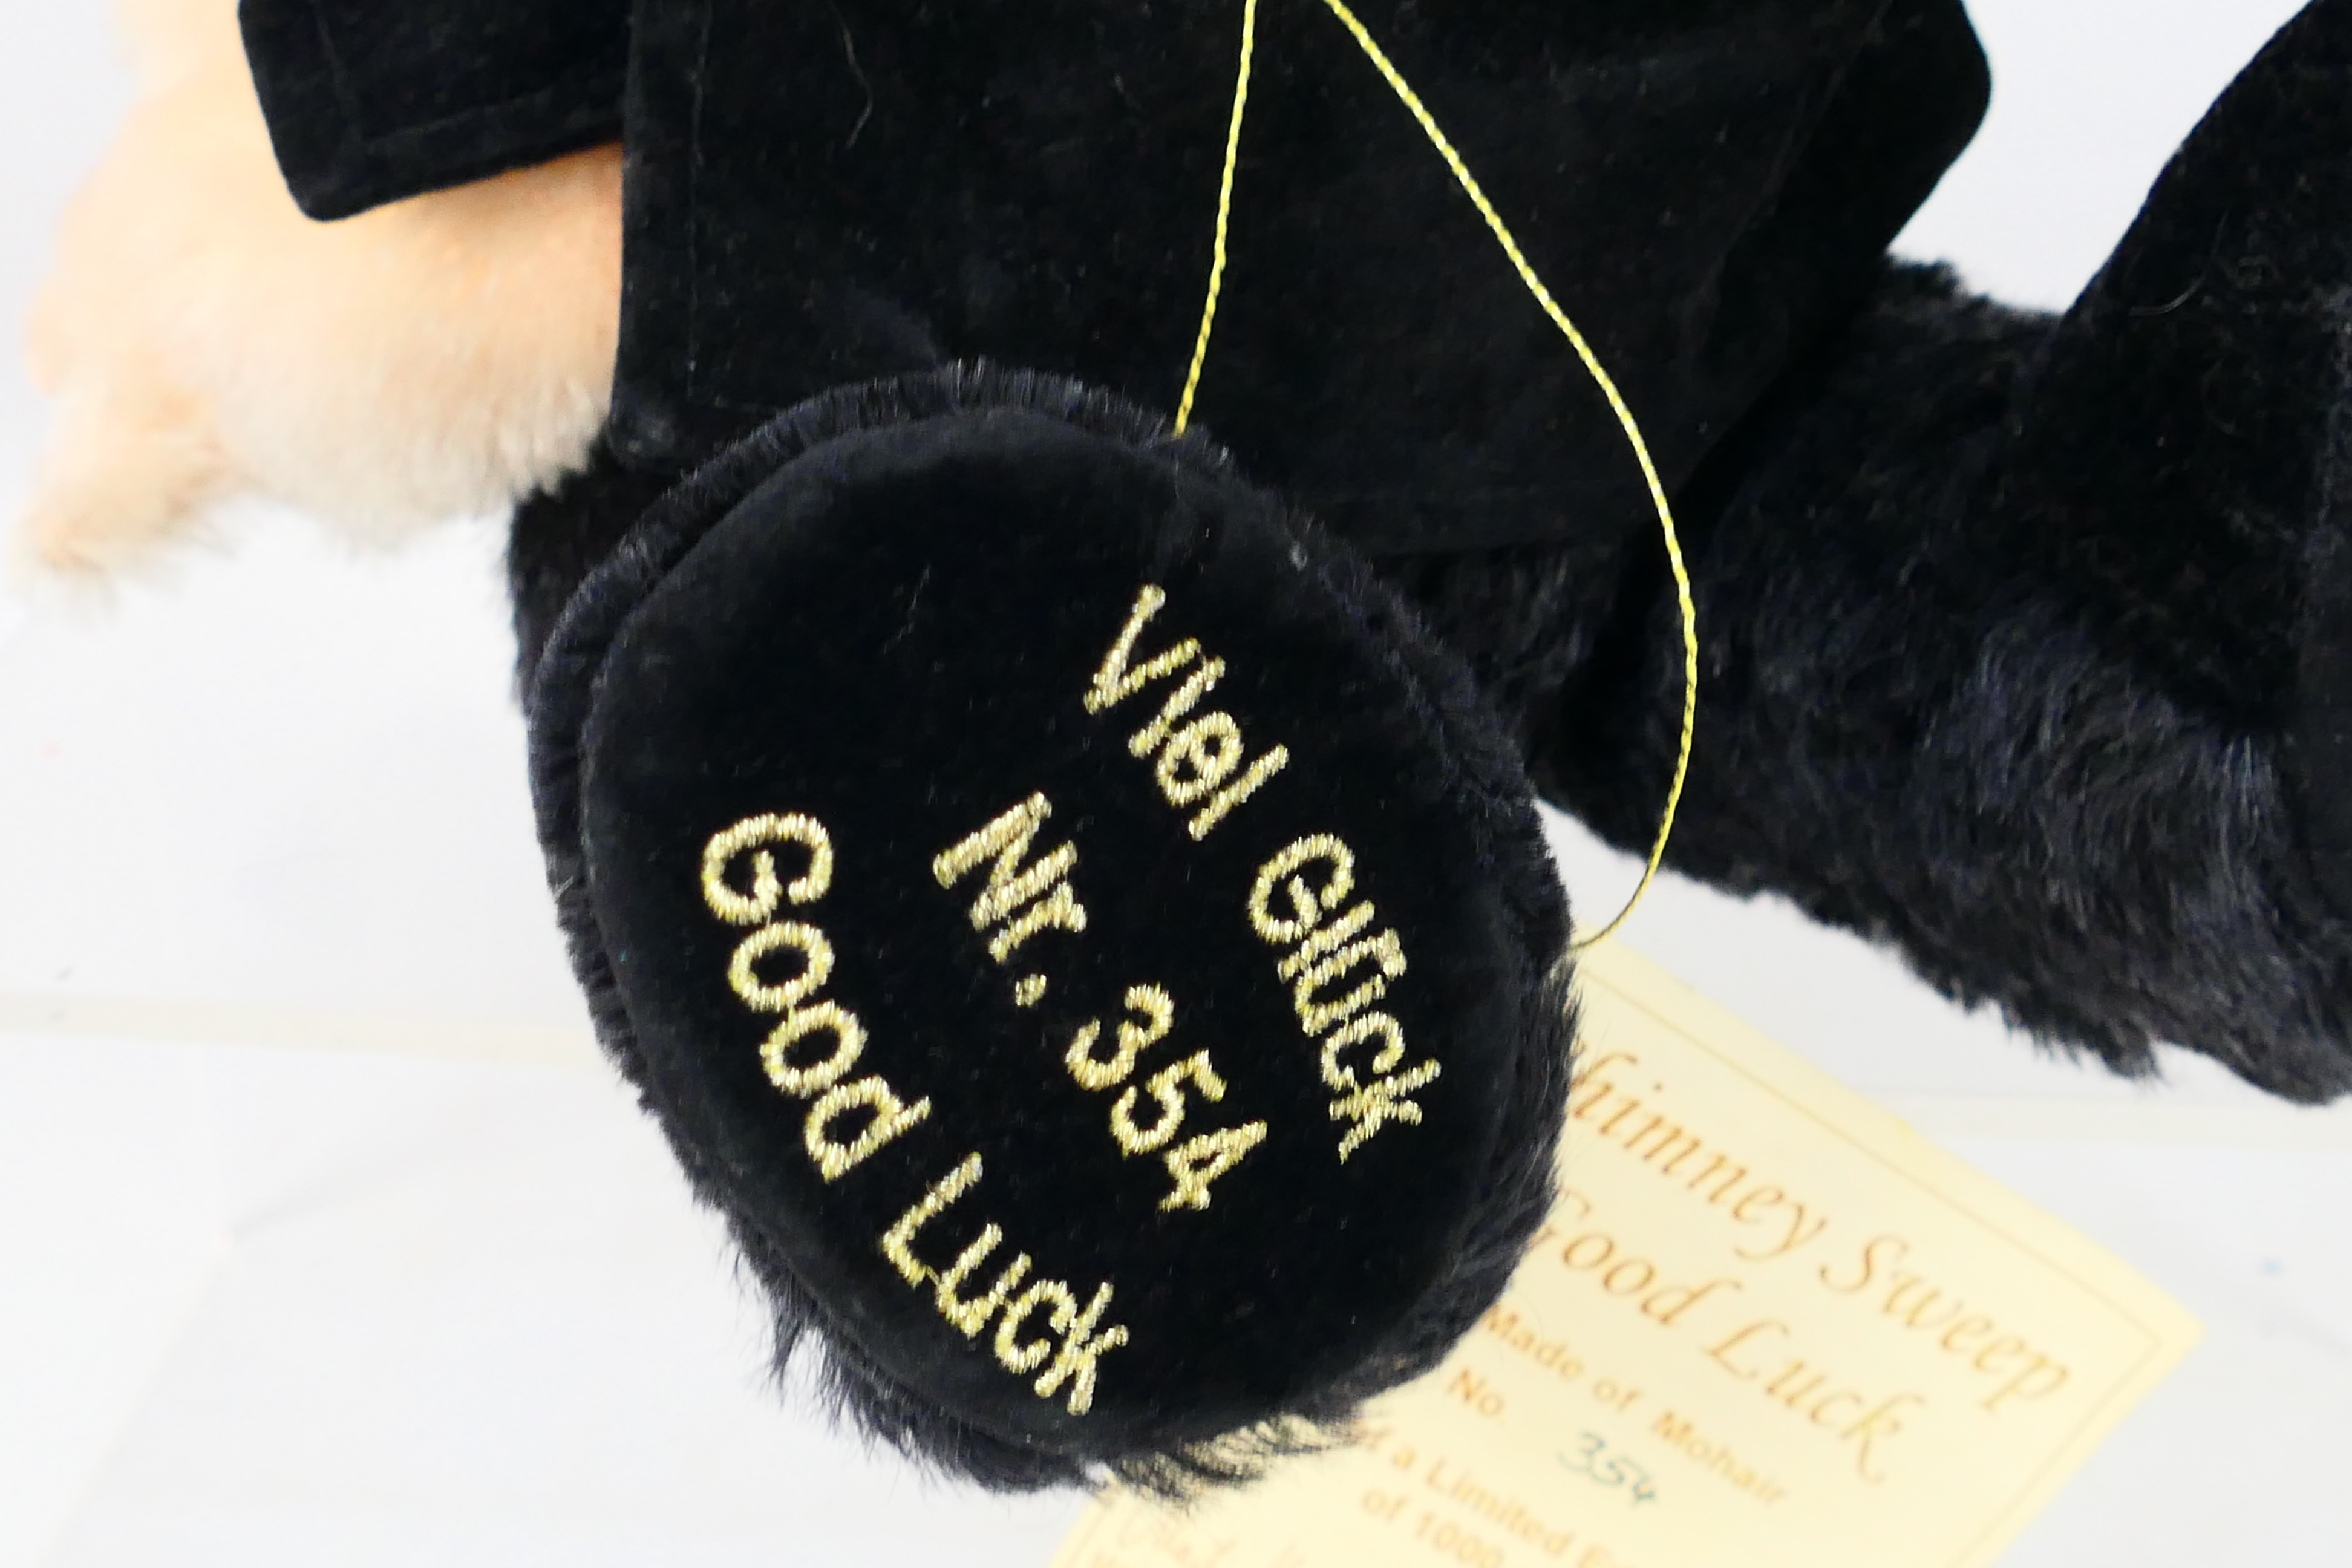 Hermann Bears - A limited edition mohair Chimney Sweep Good Luck bear number 354 of only 1000 - Image 3 of 7